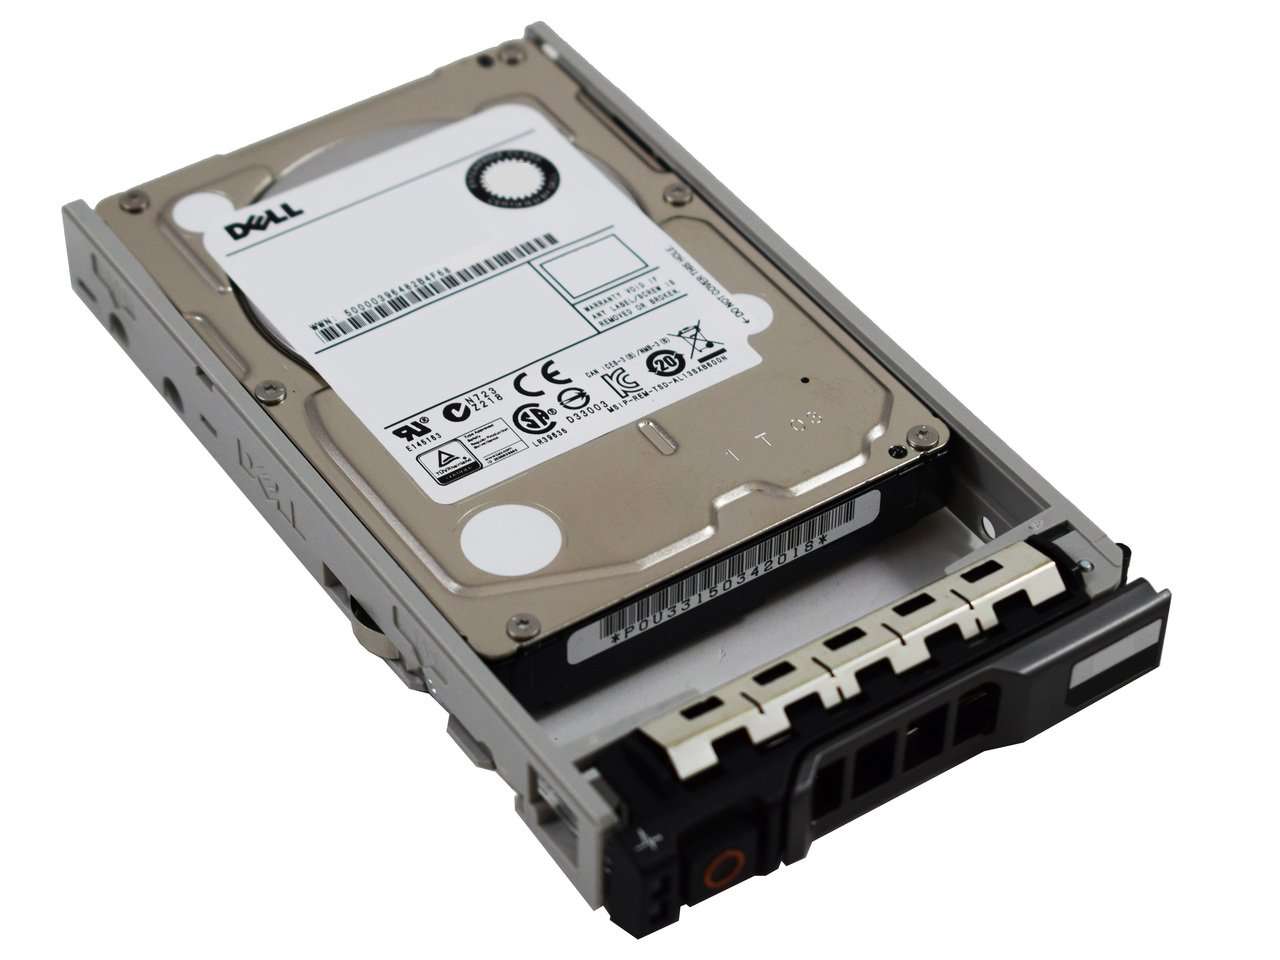 Dell G13 0990FD 600GB 15K RPM SAS 6Gb/s 512n 2.5" Manufacturer Recertified HDD